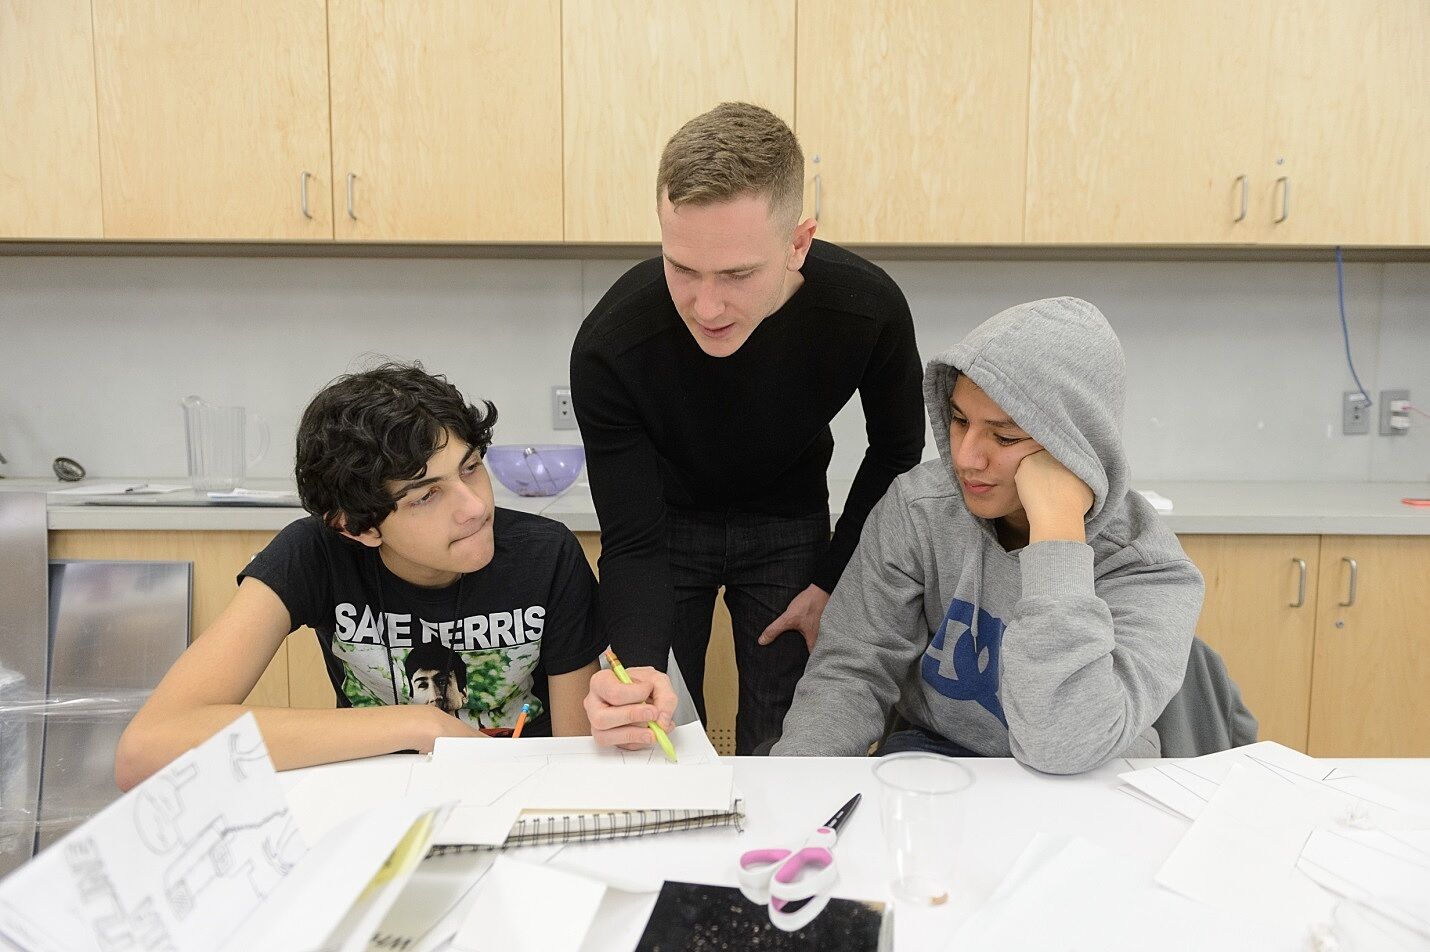 Artist working with two students.